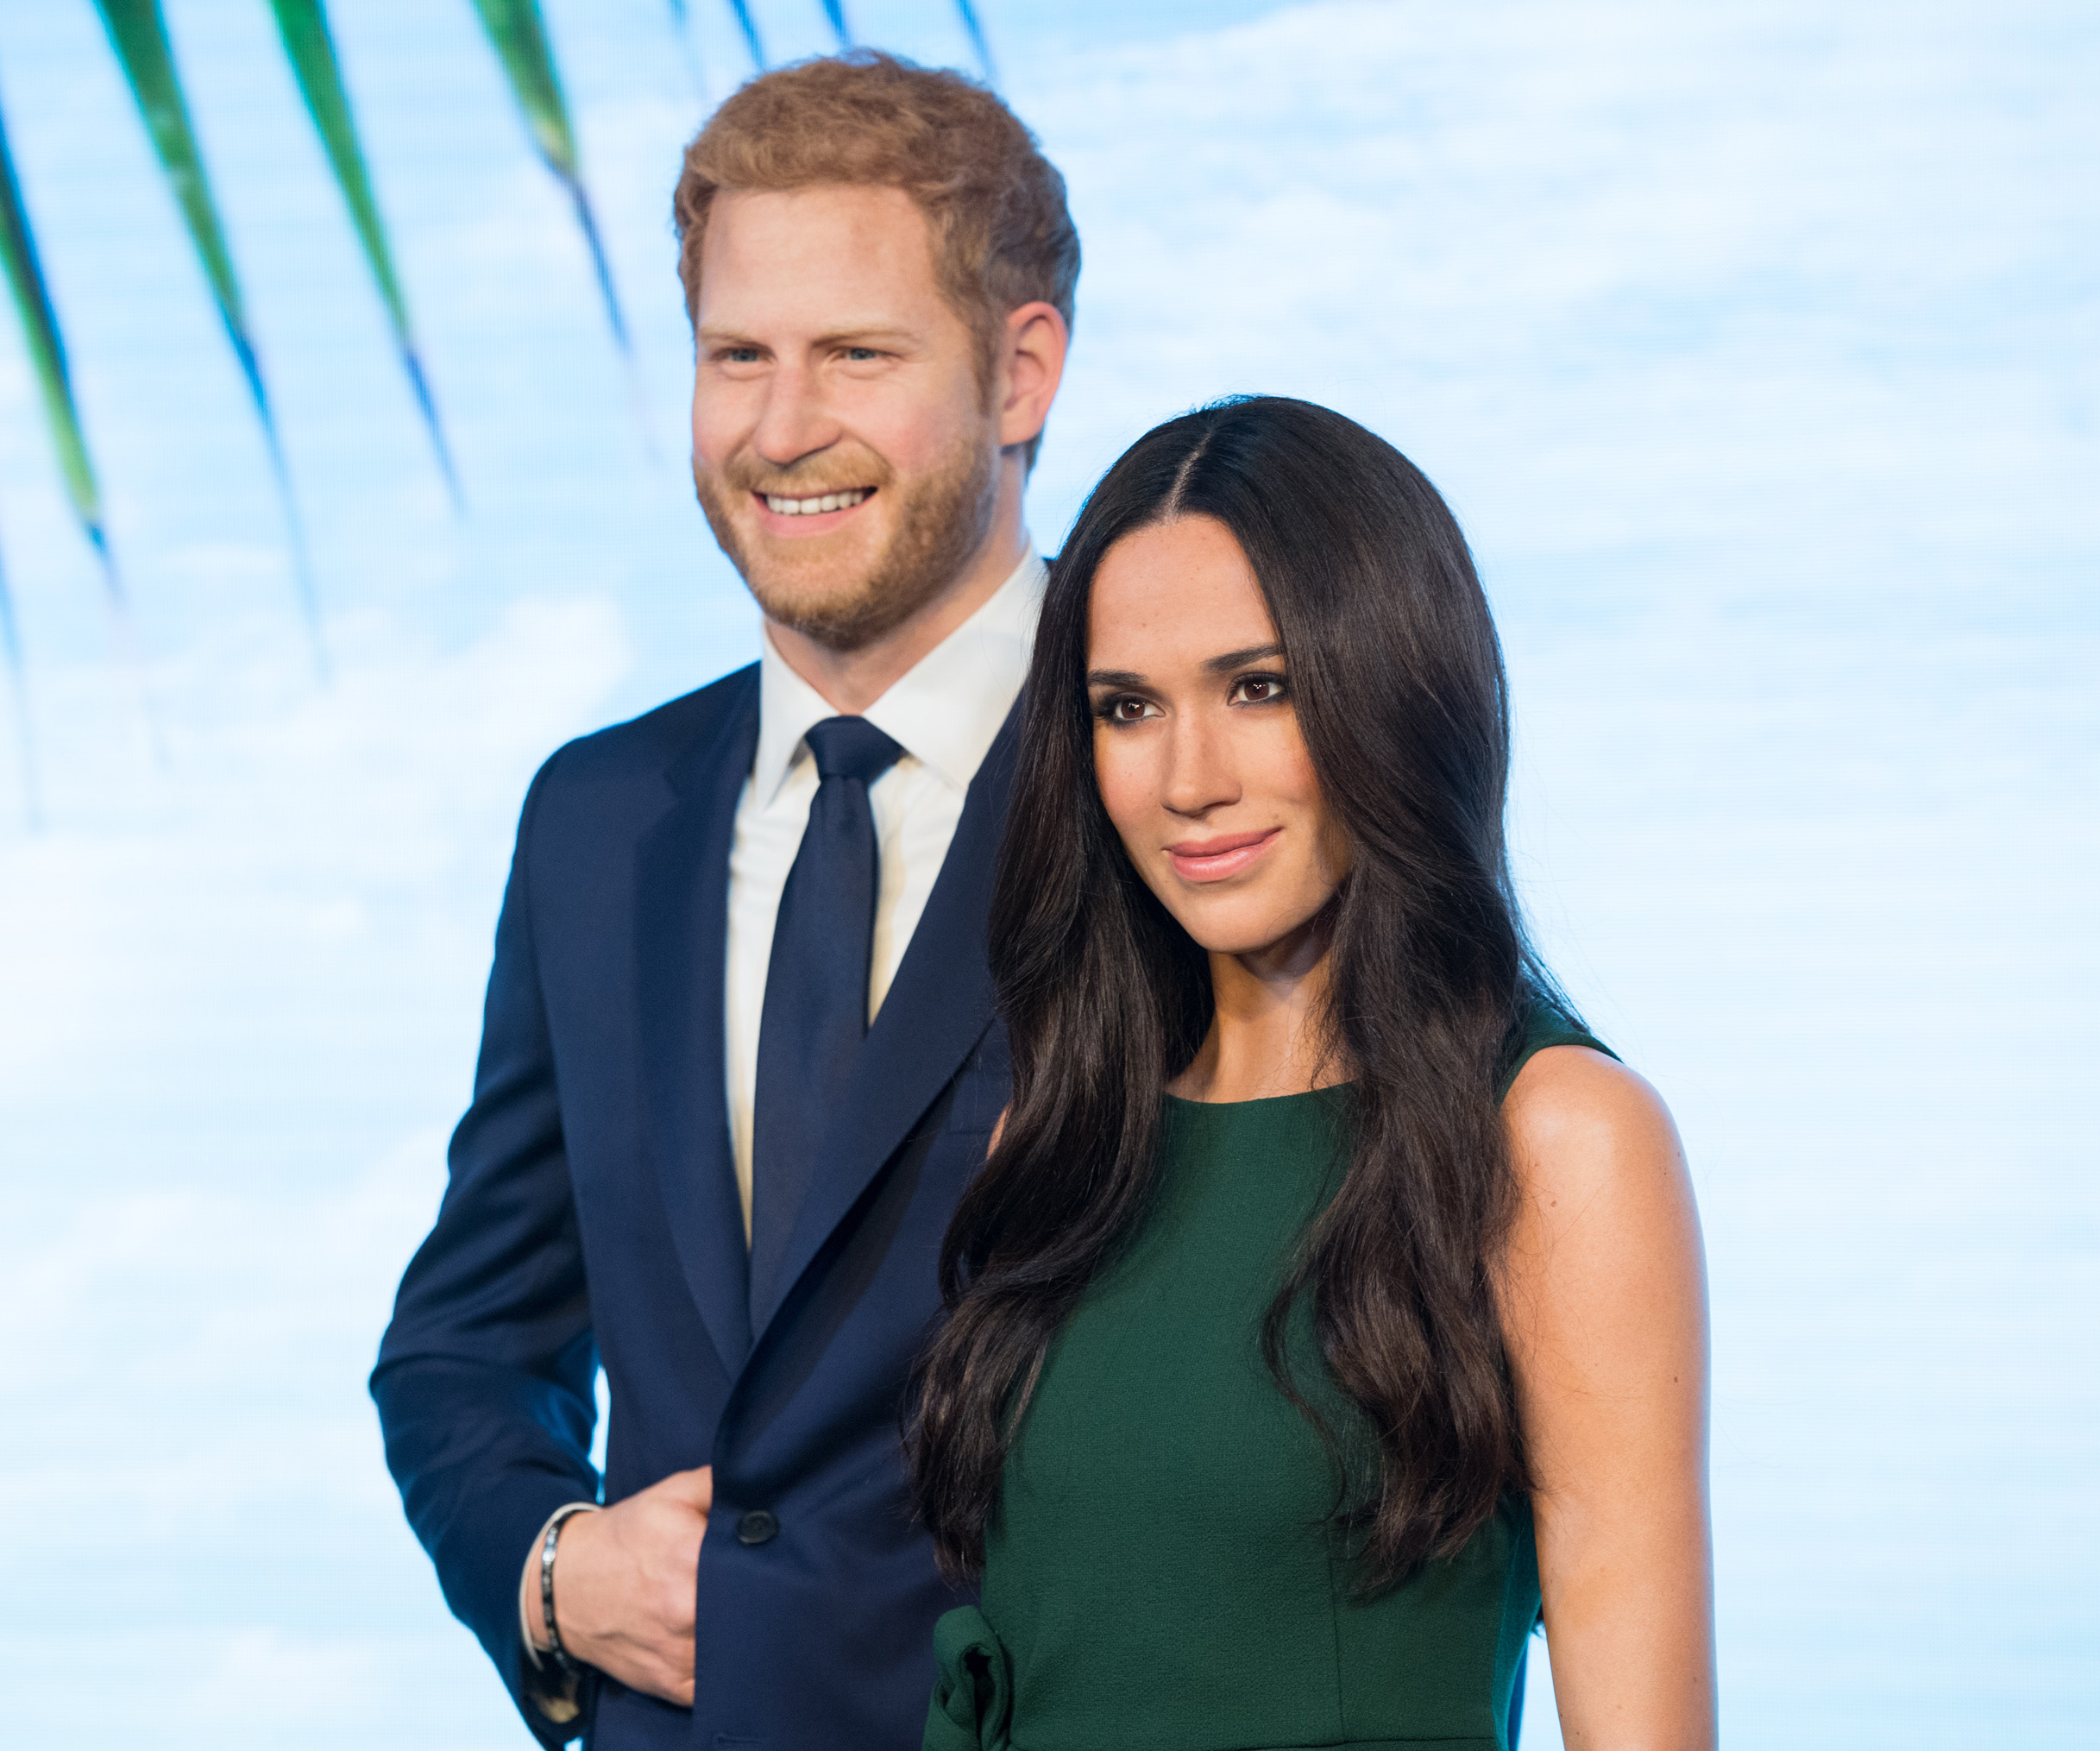 The Royal mould: Meghan Markle’s wax figure versus Kate Middleton’s proves to be a tough call